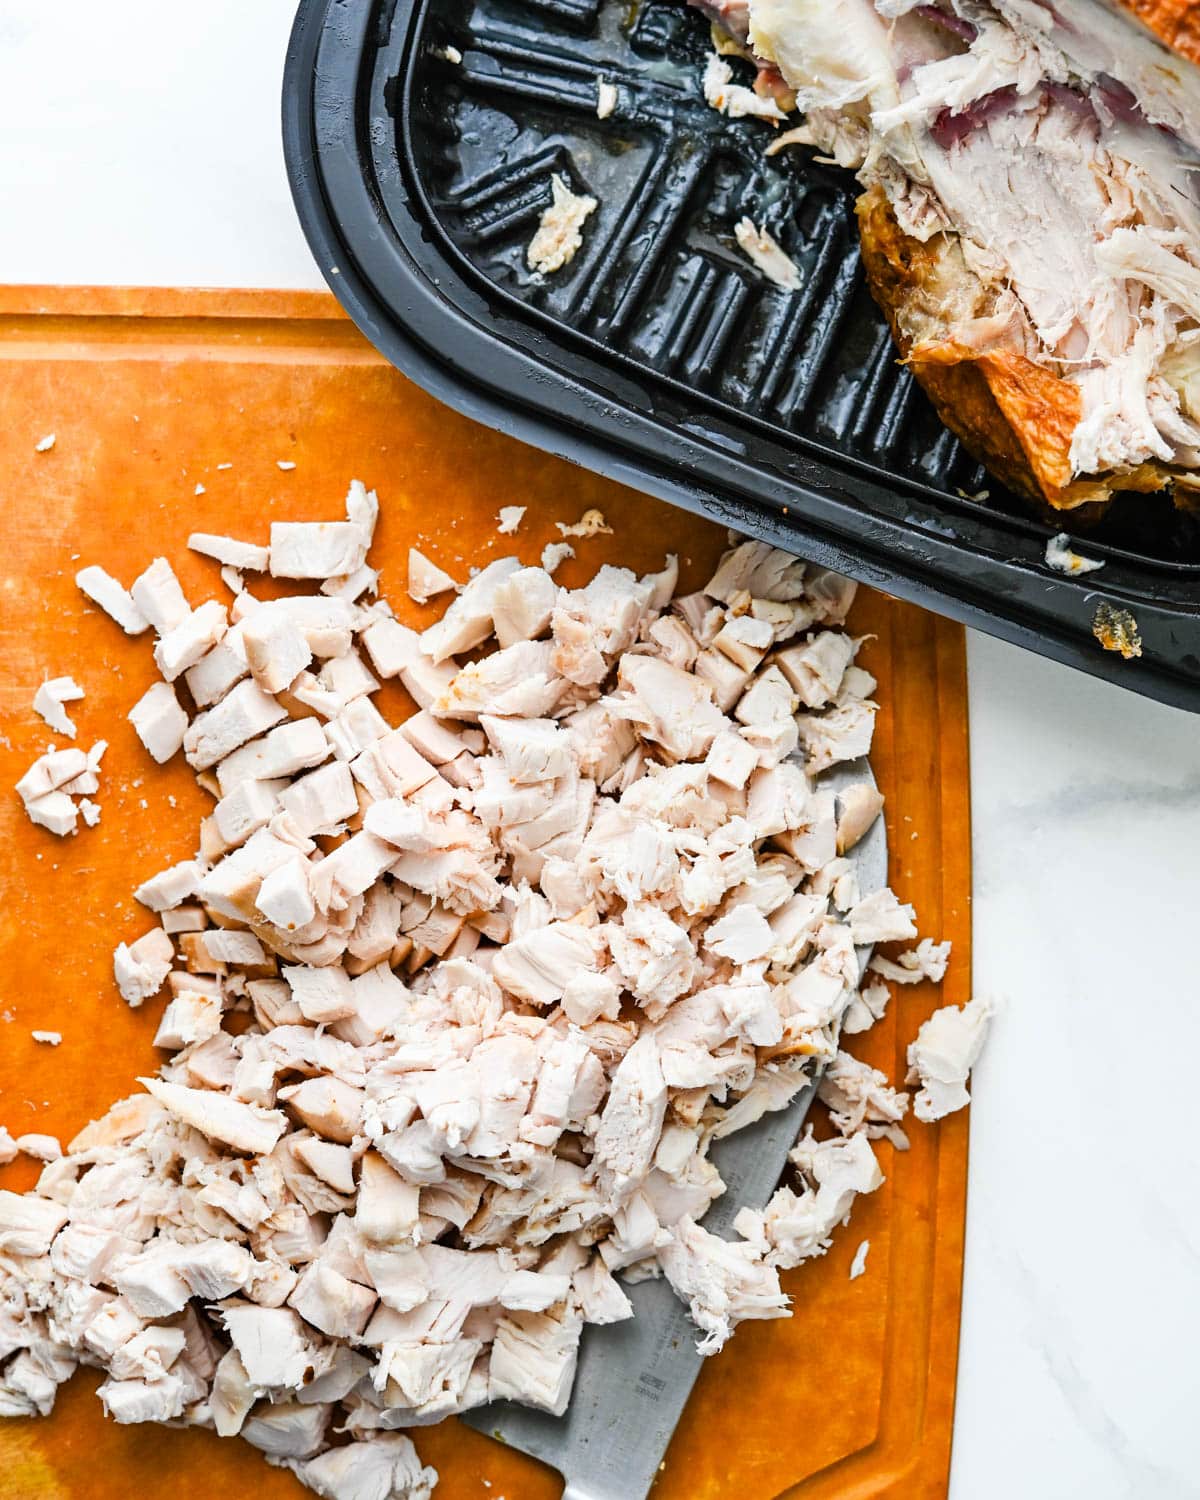 Dicing meat from the rotisserie chicken.